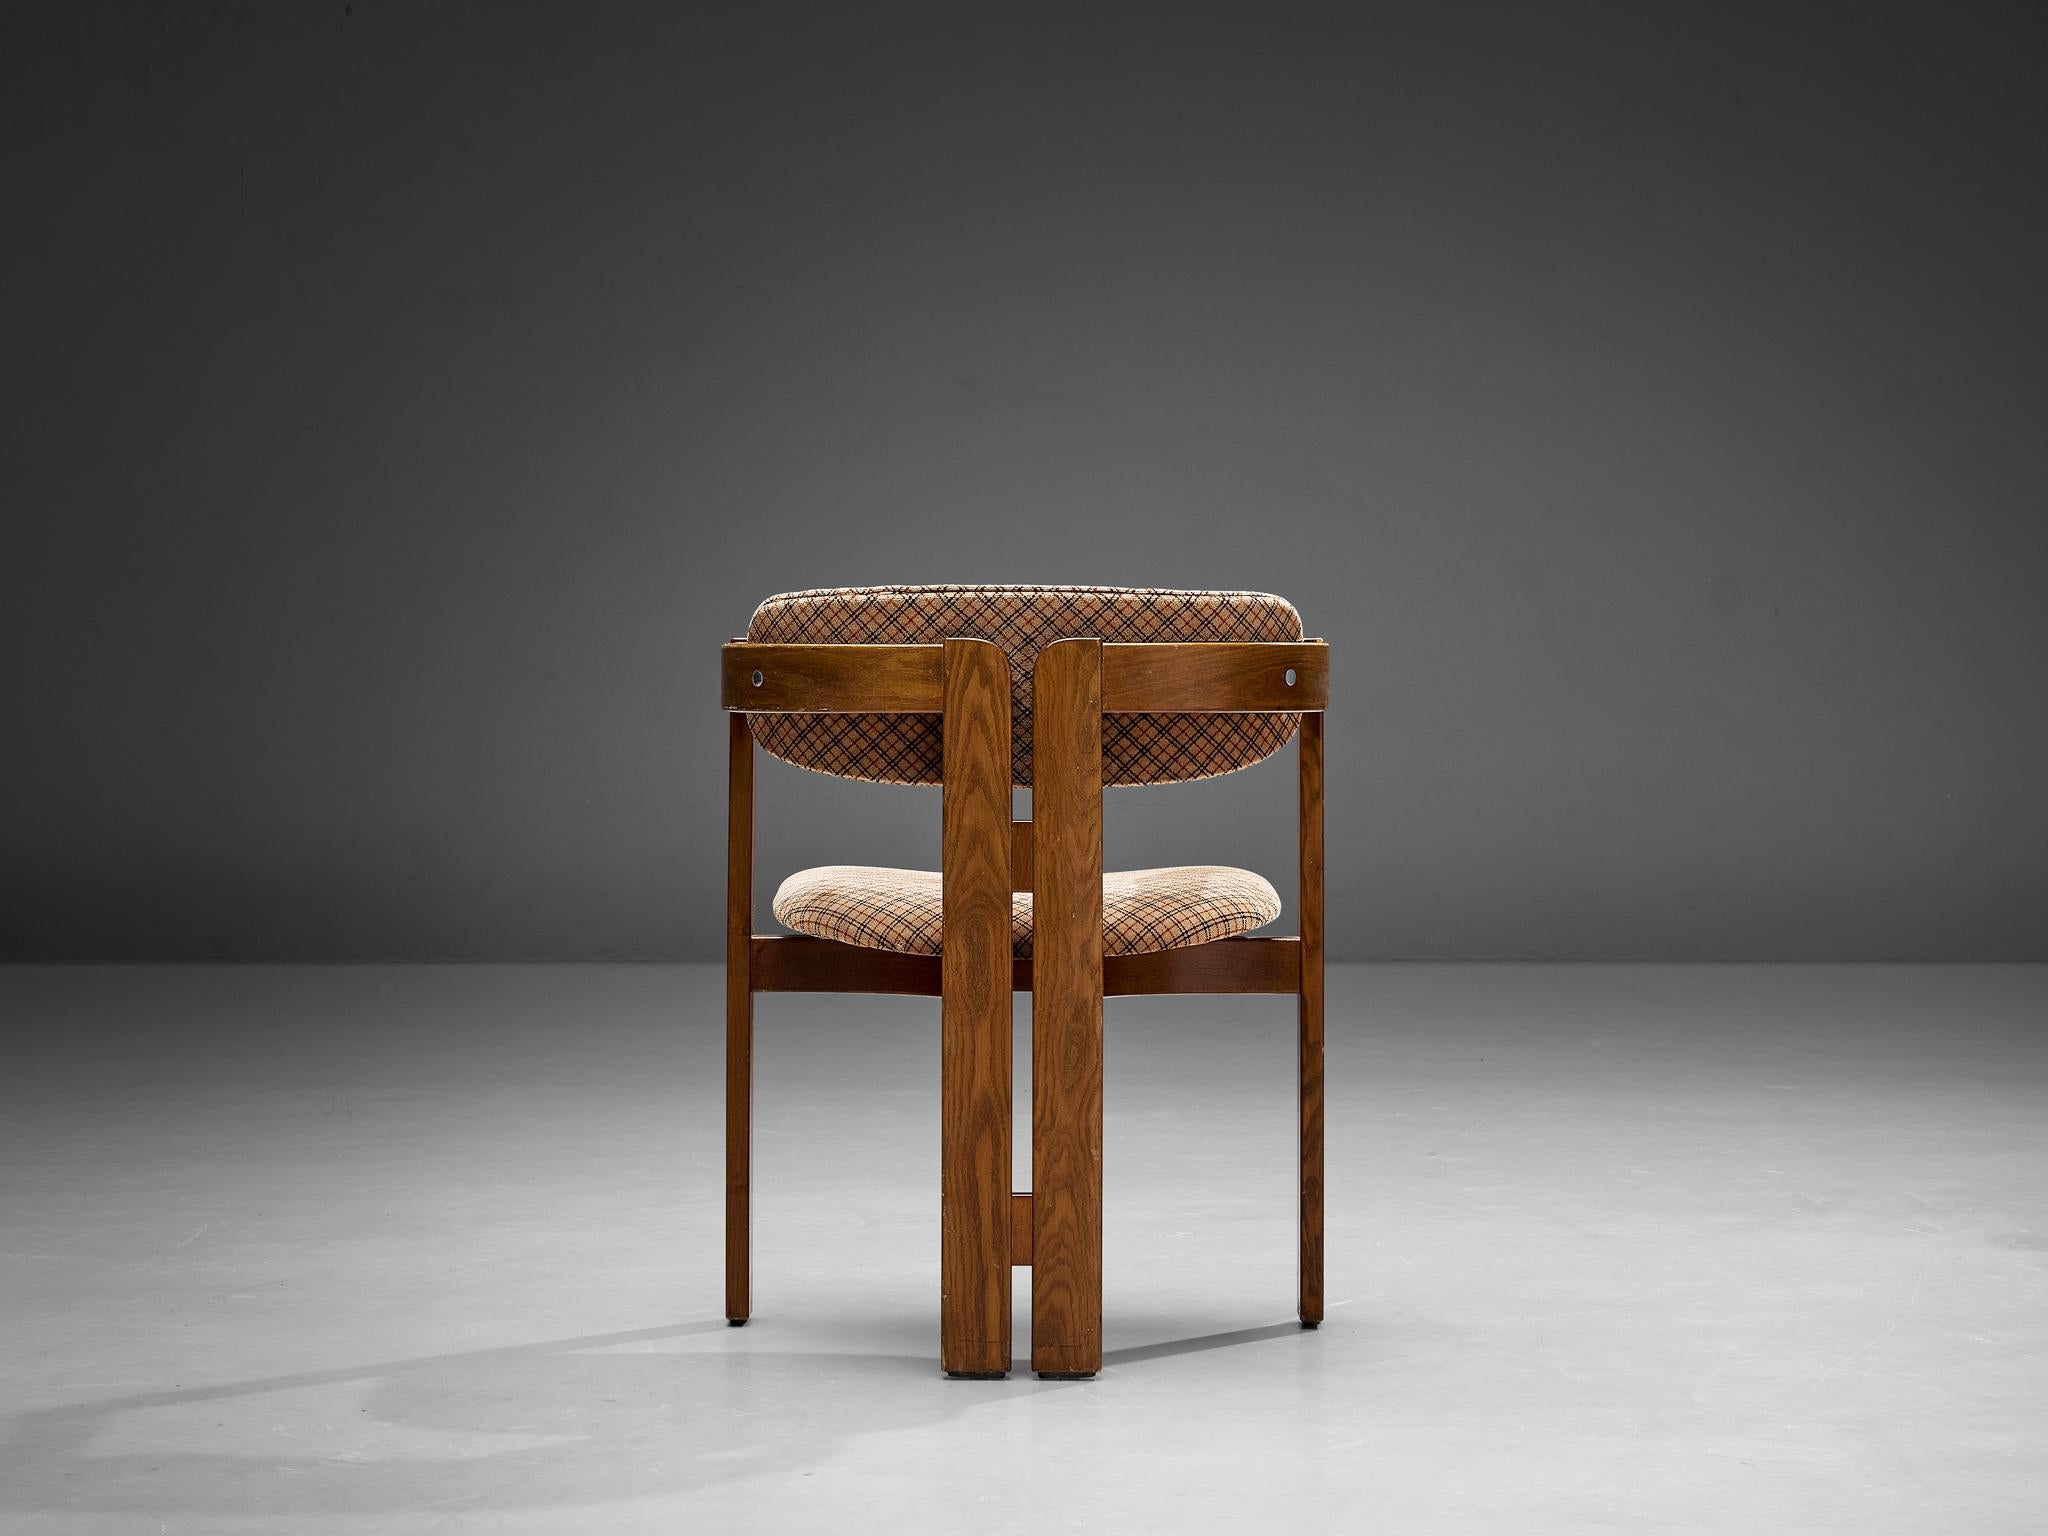 Dining chair, ash, fabric, Italy, 1970s

This Italian dining chair has a strong resemblance to Augusto Savini's 'Pamplona' chair (1965) and Afra & Tobia Scrapa's 'Pigreco' chair (1959/60), yet the designs are different in their details. This chair